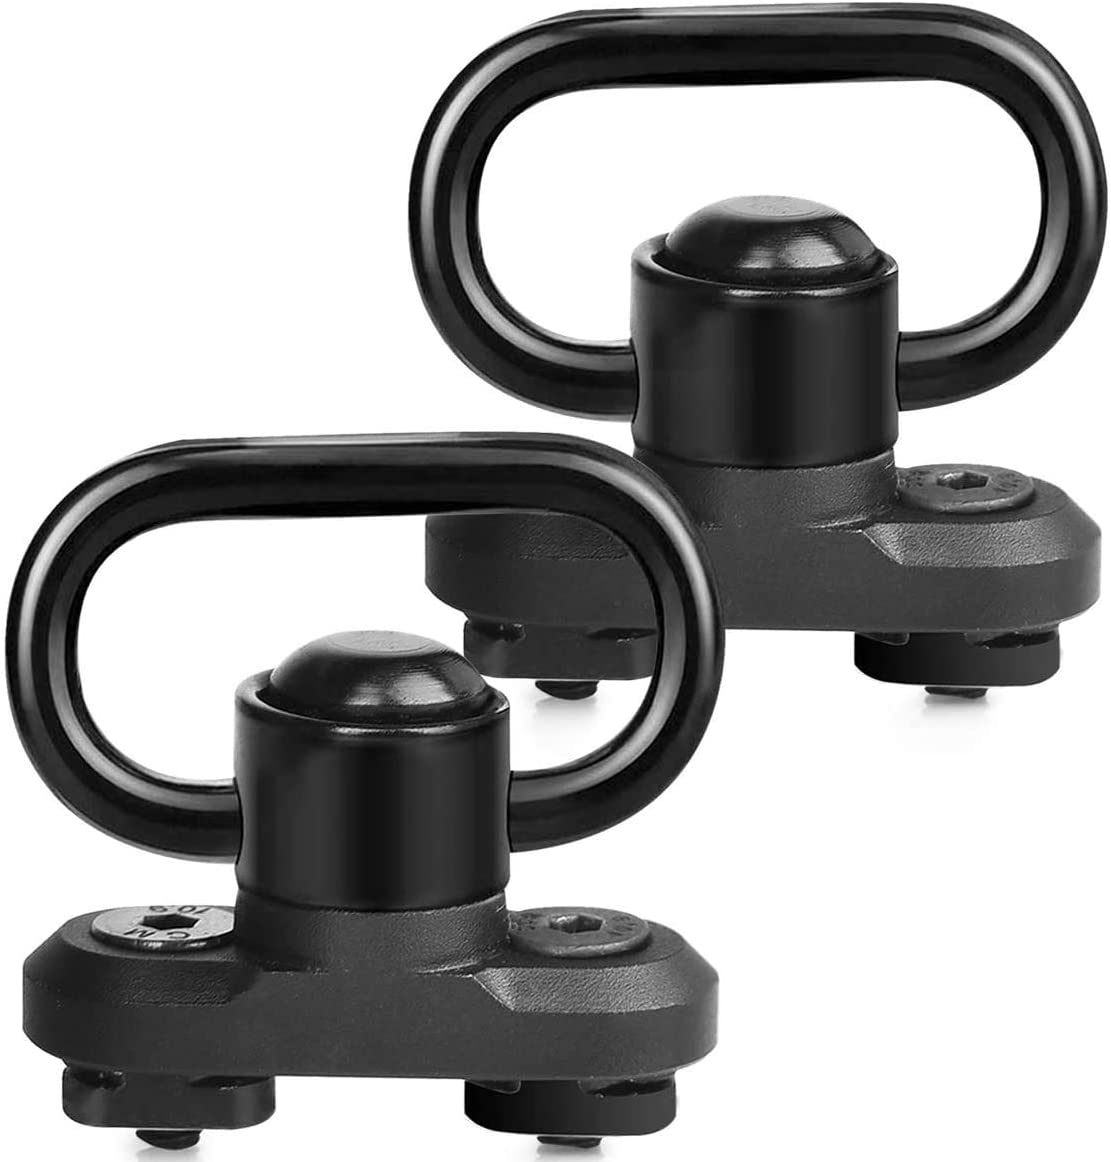 2 Point Sling & Mloc Sling Mount - Adjustable Extra Long Two Point Traditional Rifle Sling with 2 Pack 1.25" QD Sling Swivels Mounts for M Lock Rail System